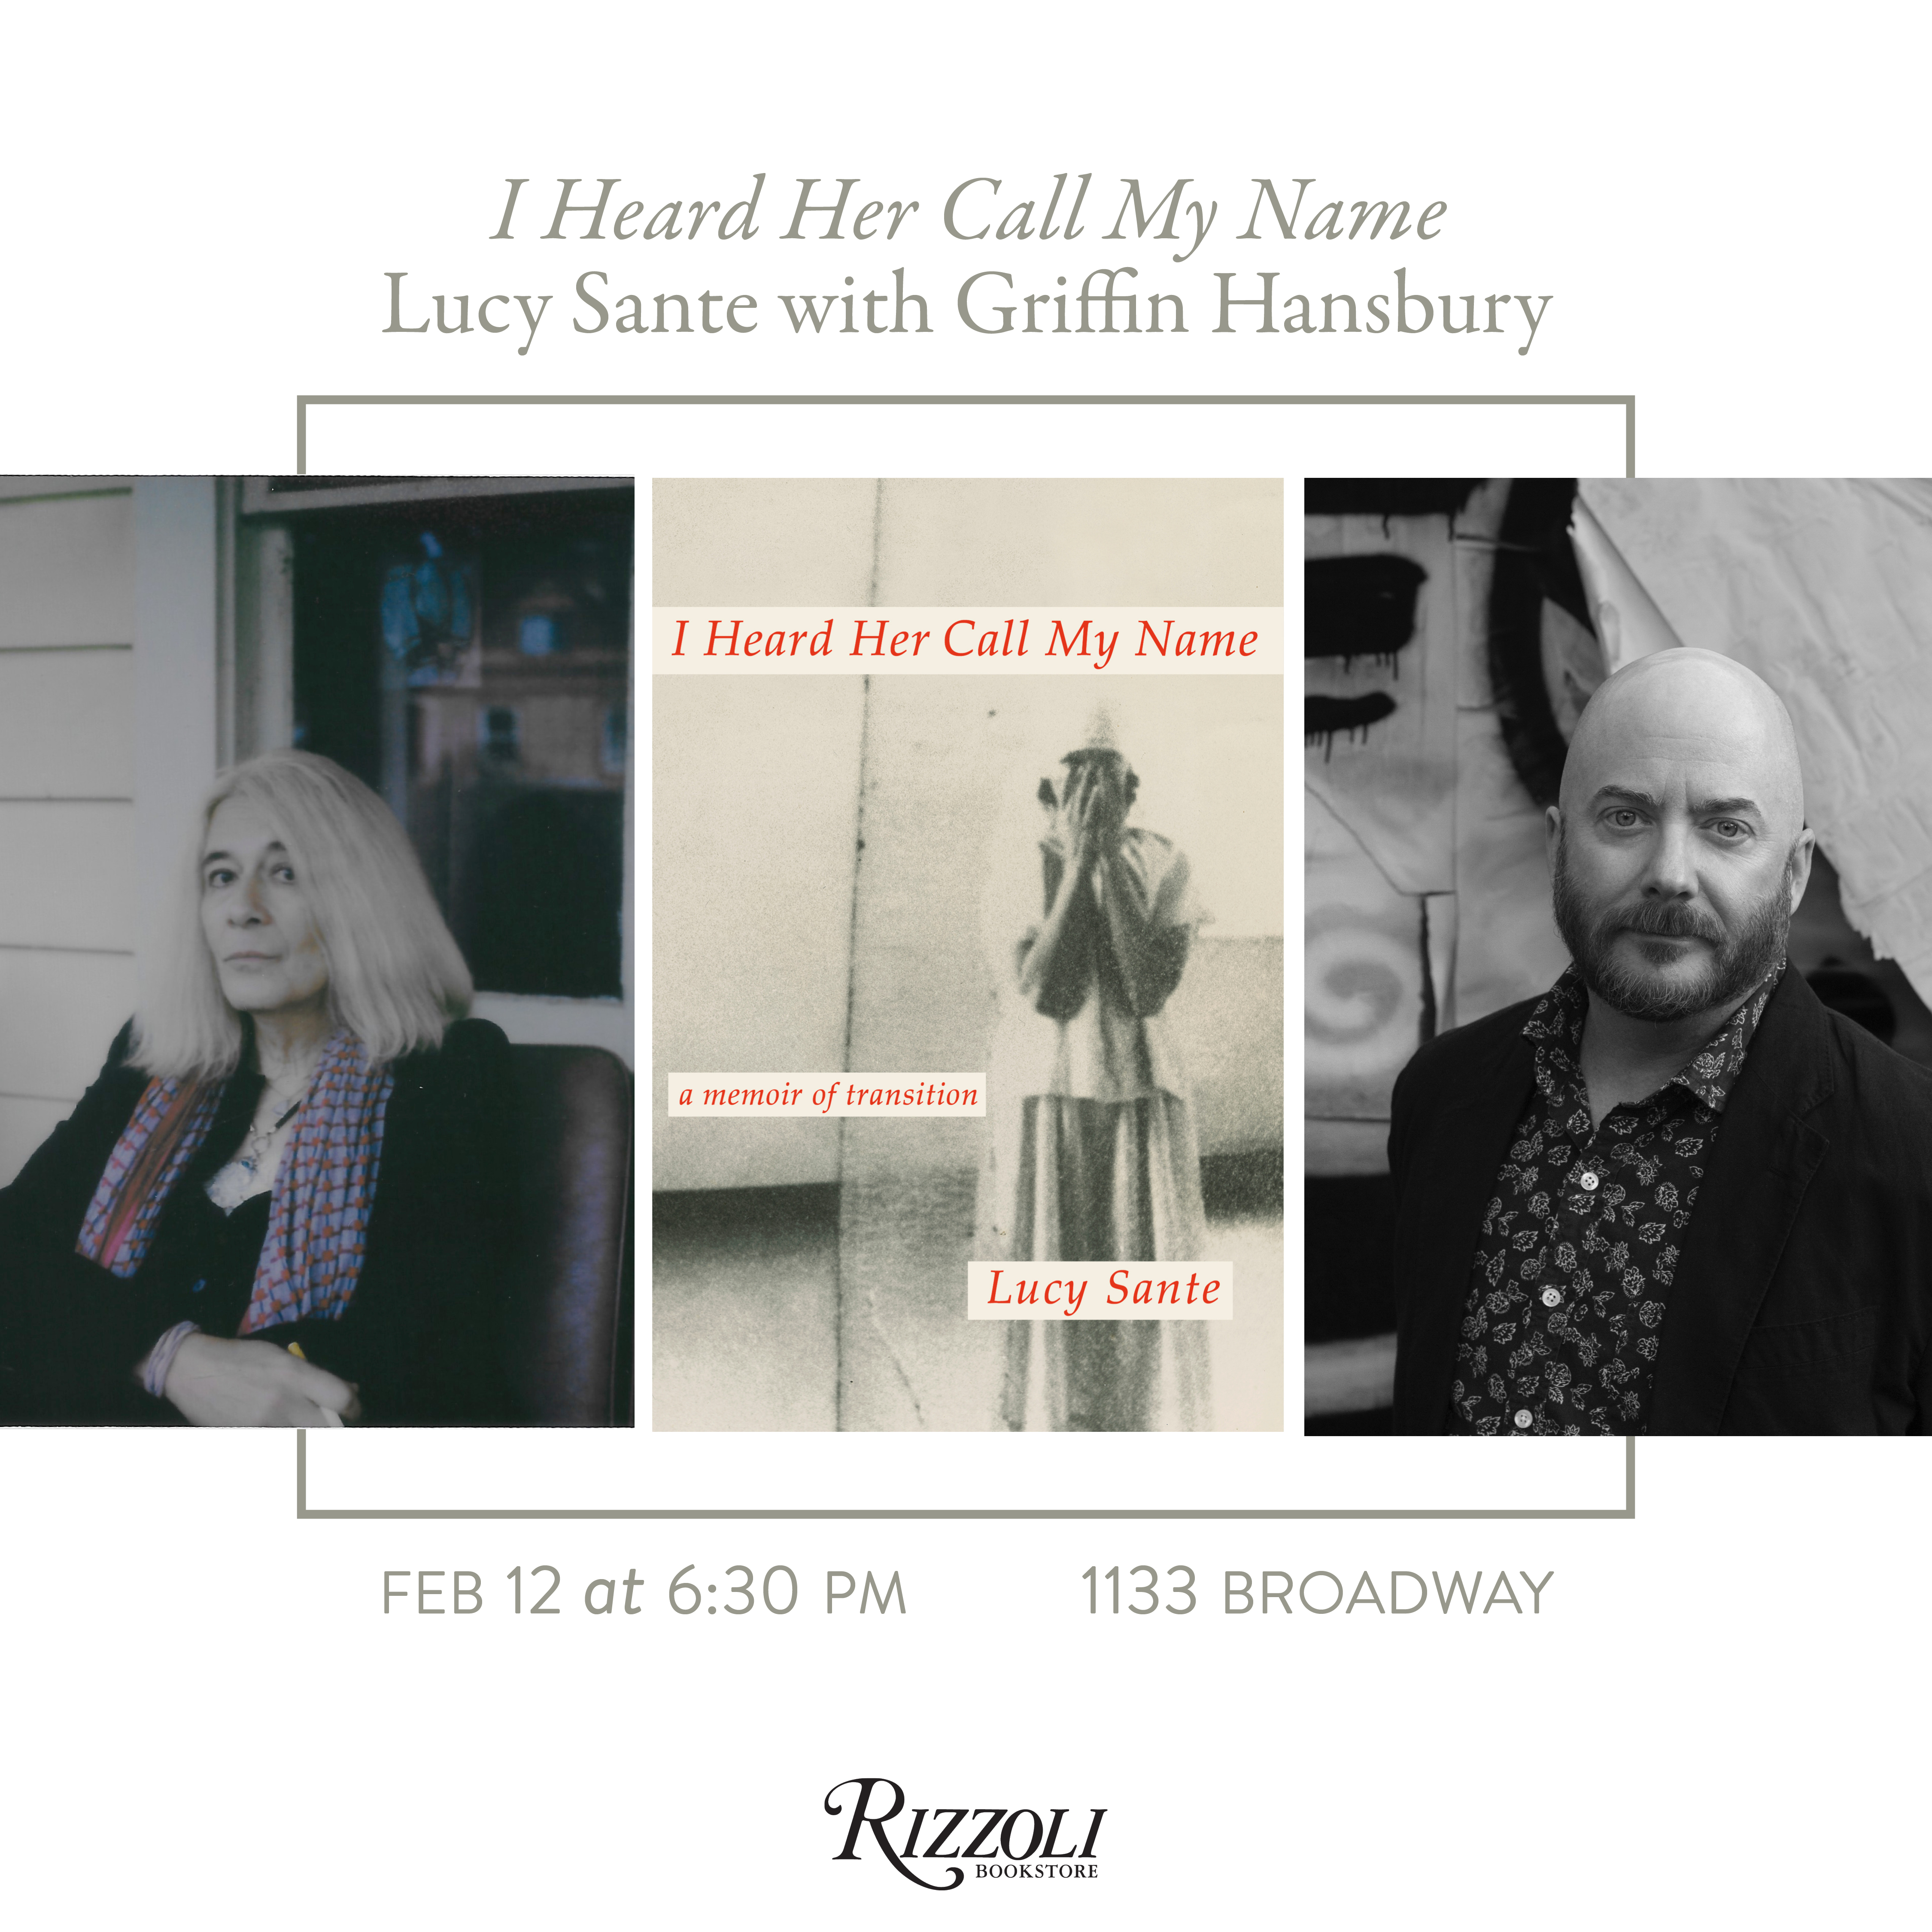 Rizzoli Bookstore: I Heard Her Call My Name by Lucy Sante with Griffin  Hansbury - Flatiron NoMad